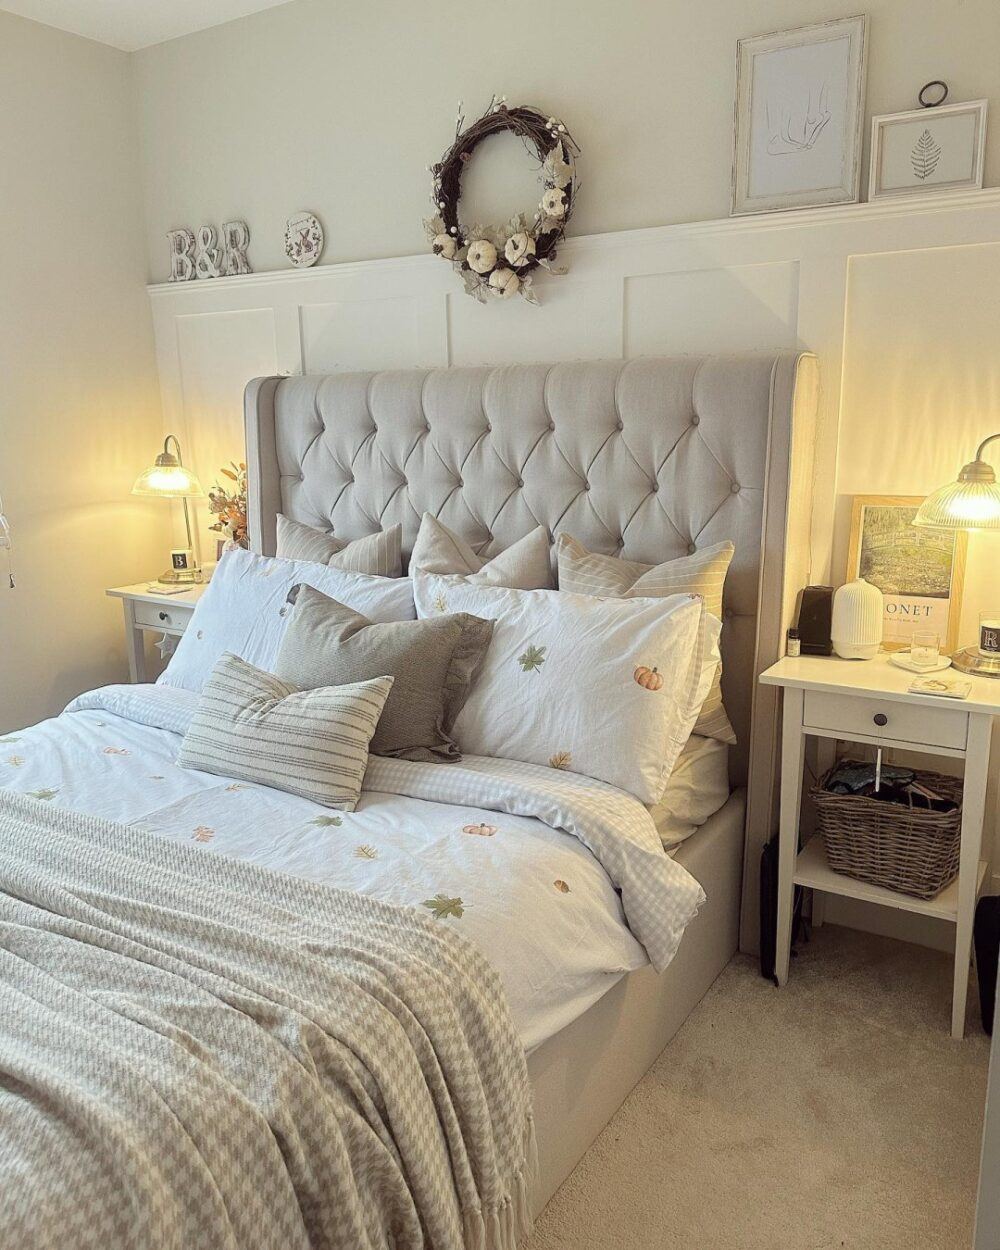 A neutral upholstered bed frame with high buttoned headboard, styled in a neutral bedroom